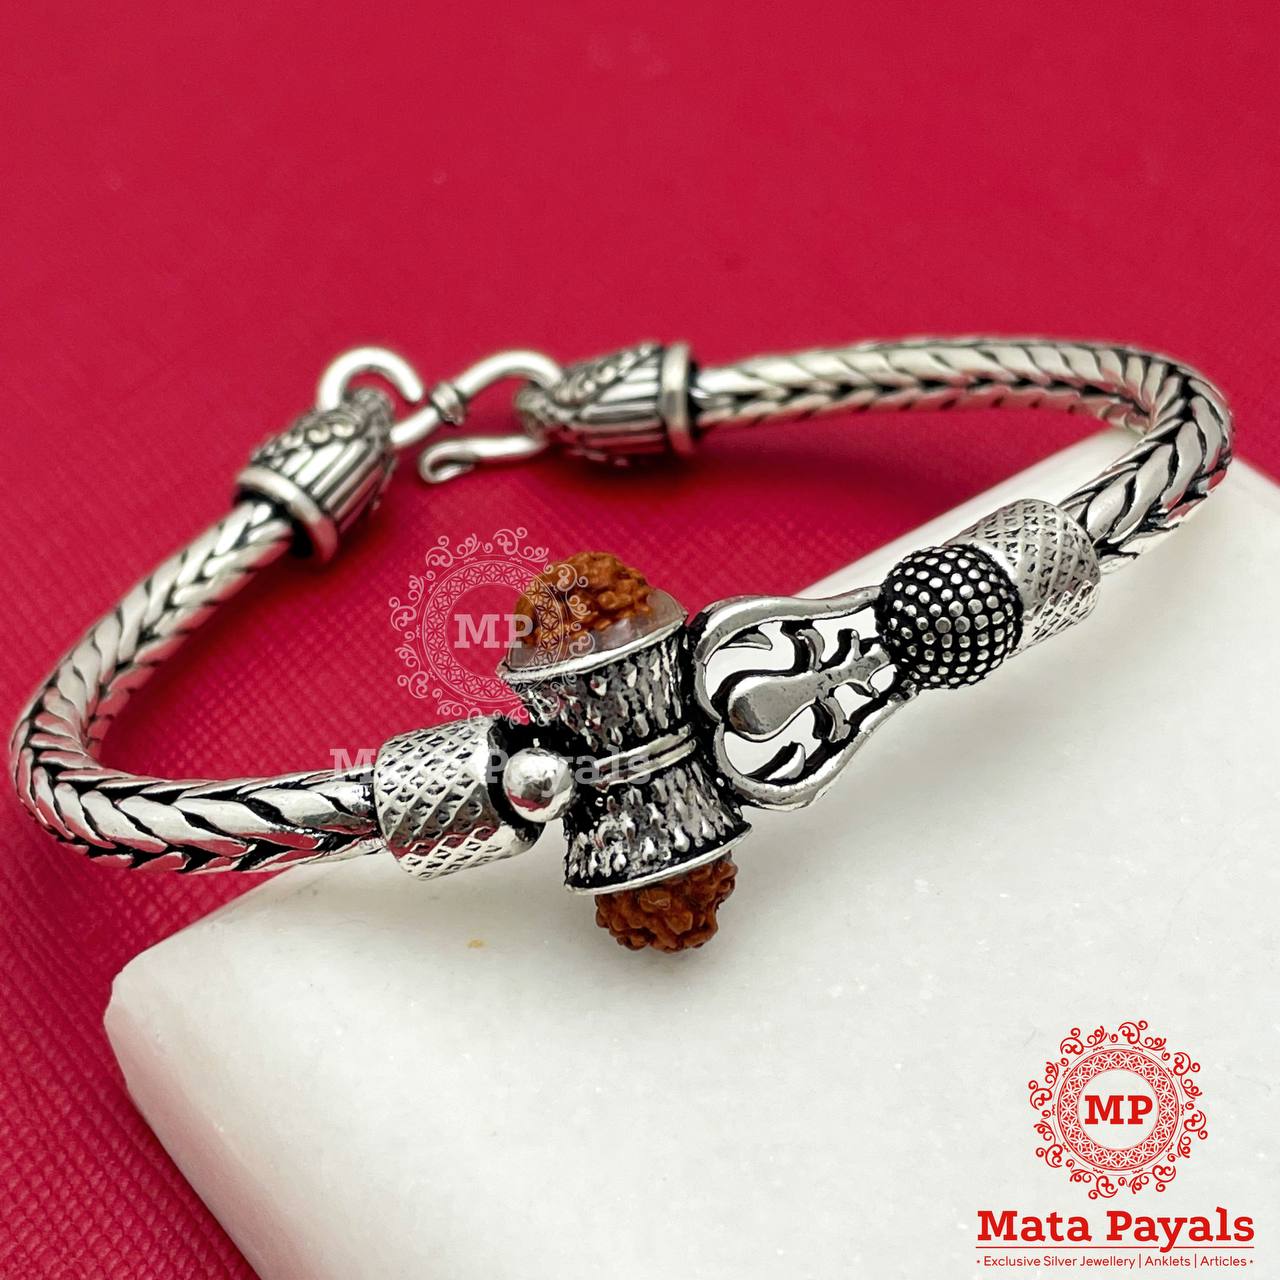 Silver Mens Bracelet - Mata Payals Exclusive Silver Jewellery